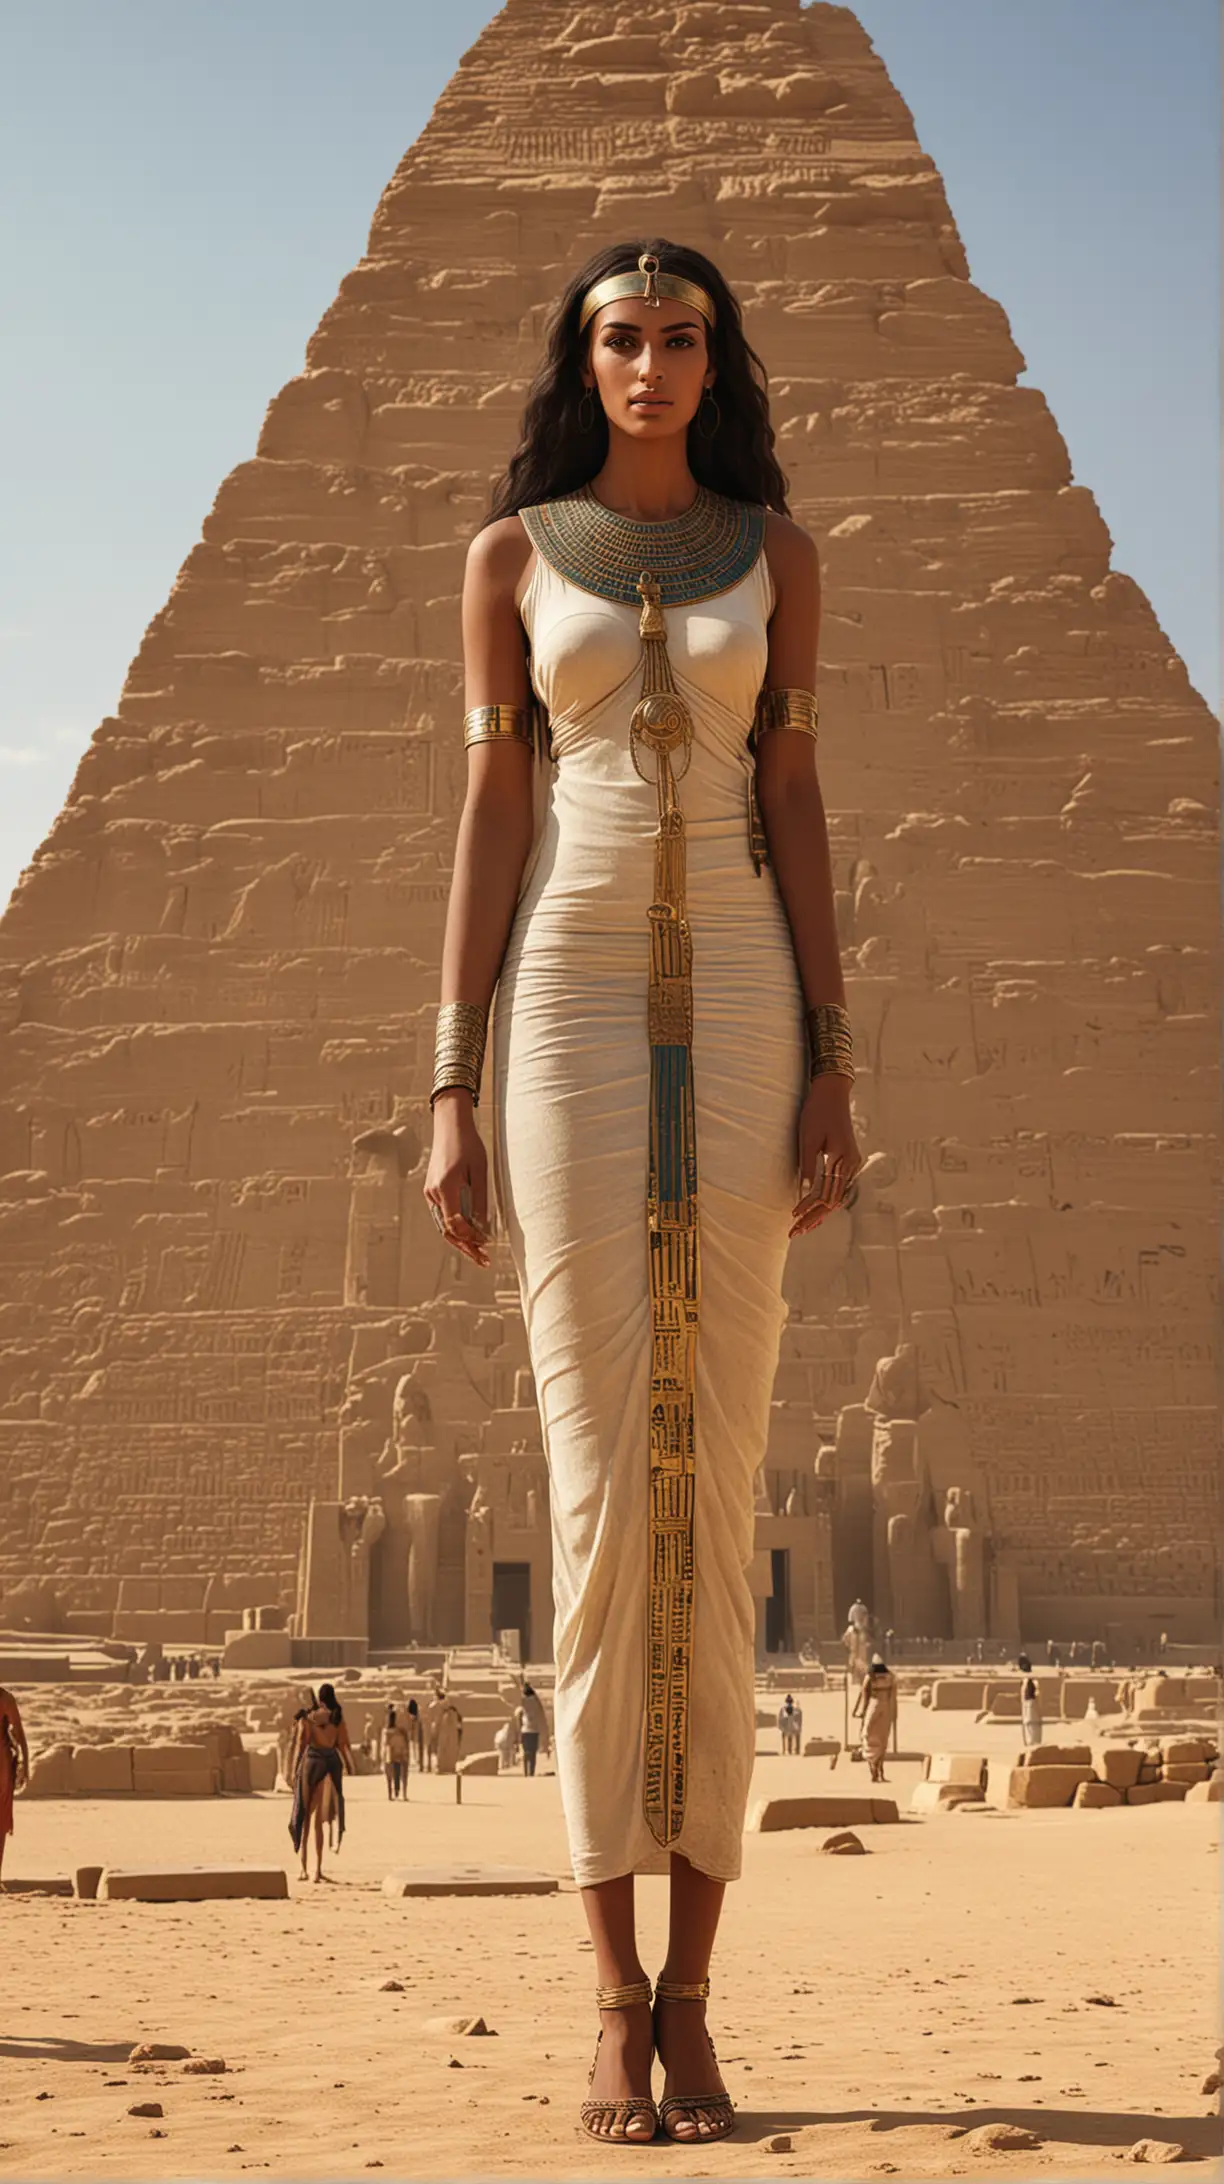 Very tall woman from Ancient Egypt, very long neck, 20 years old, god-like, slightly unnatural, photo-realism, outside near pyramid